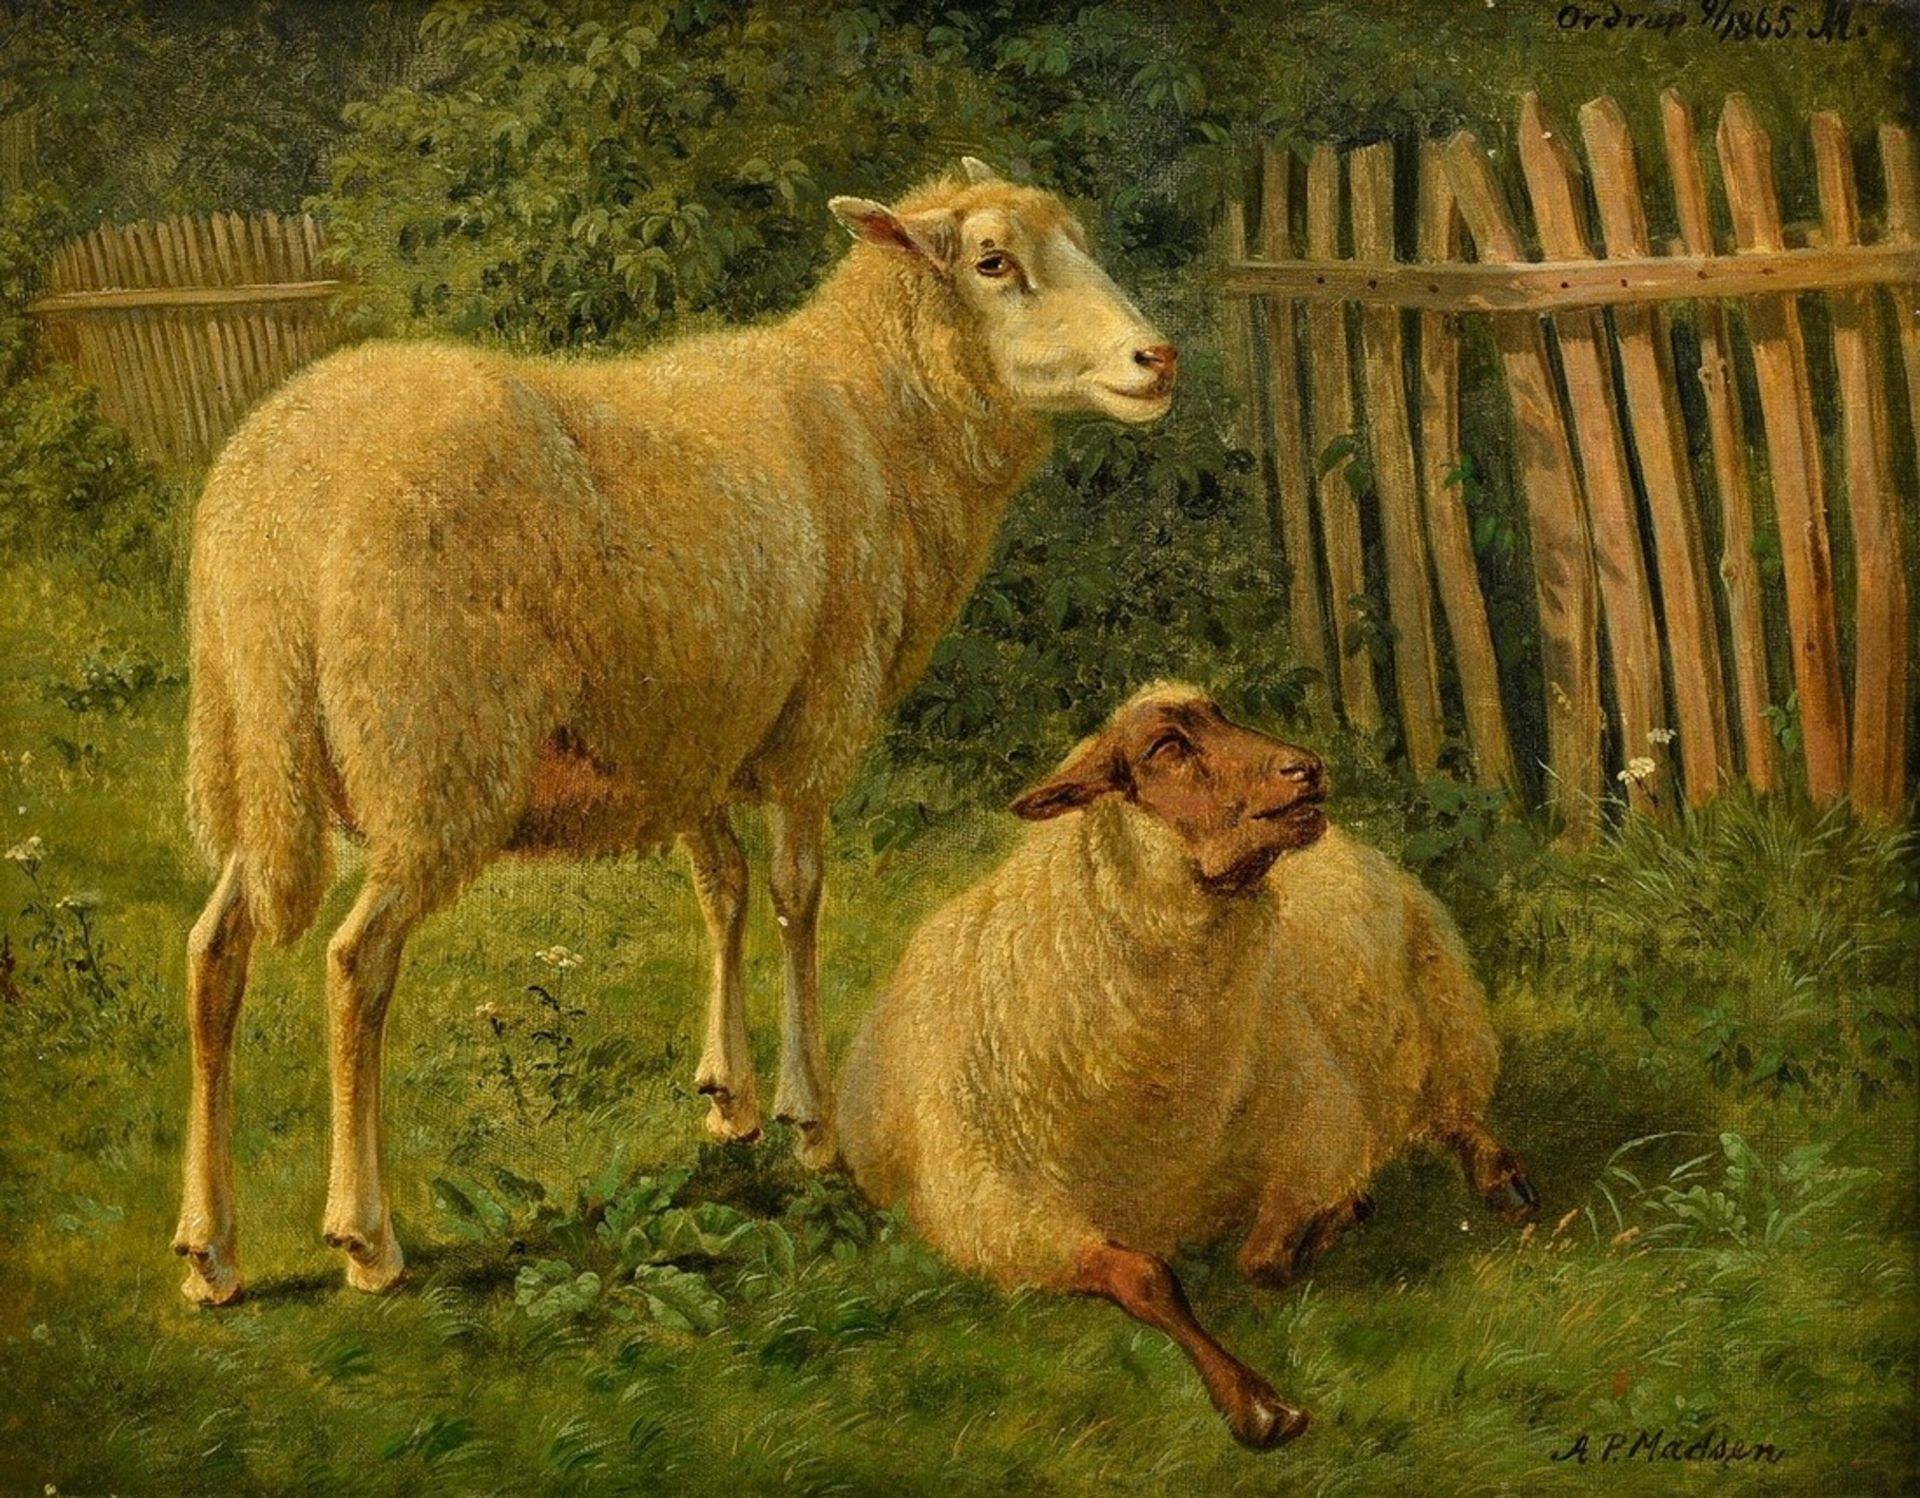 Madsen, Andreas Peter (1822-1911) "Landscape with Sheep" 1865, oil/canvas, sign. lower right, dat./